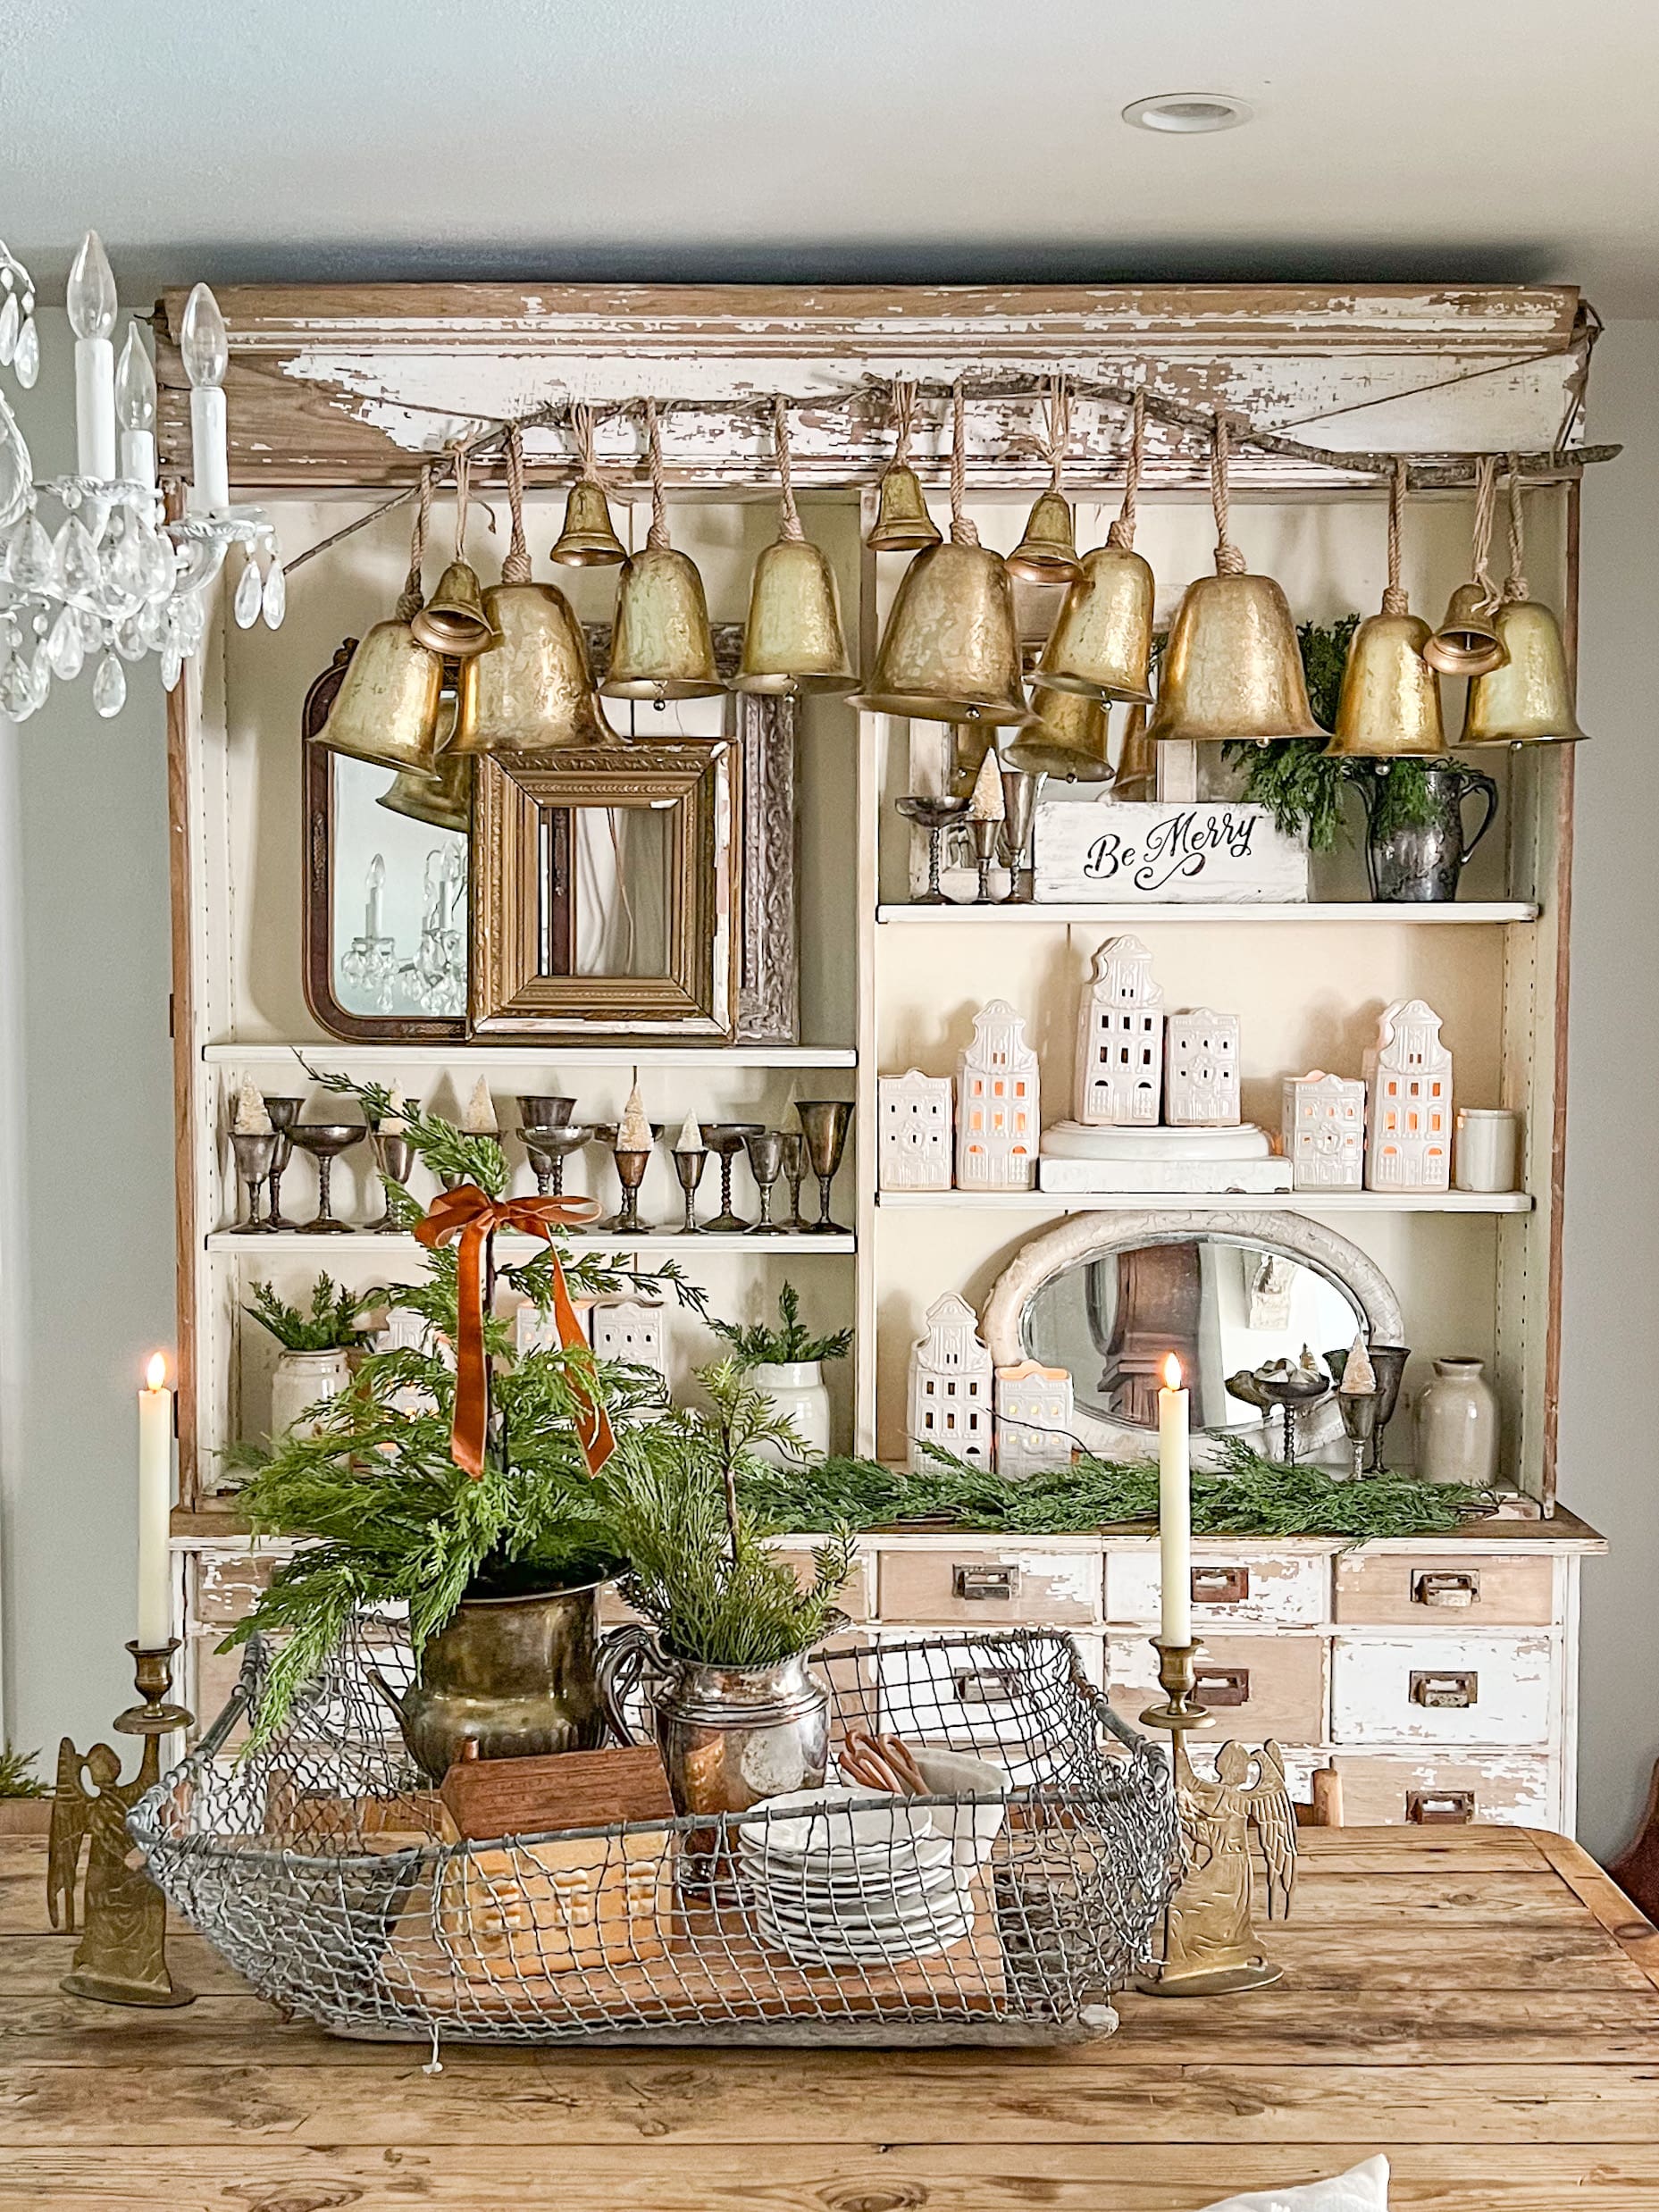 17 Festive Ways to Decorate Your Kitchen for Christmas